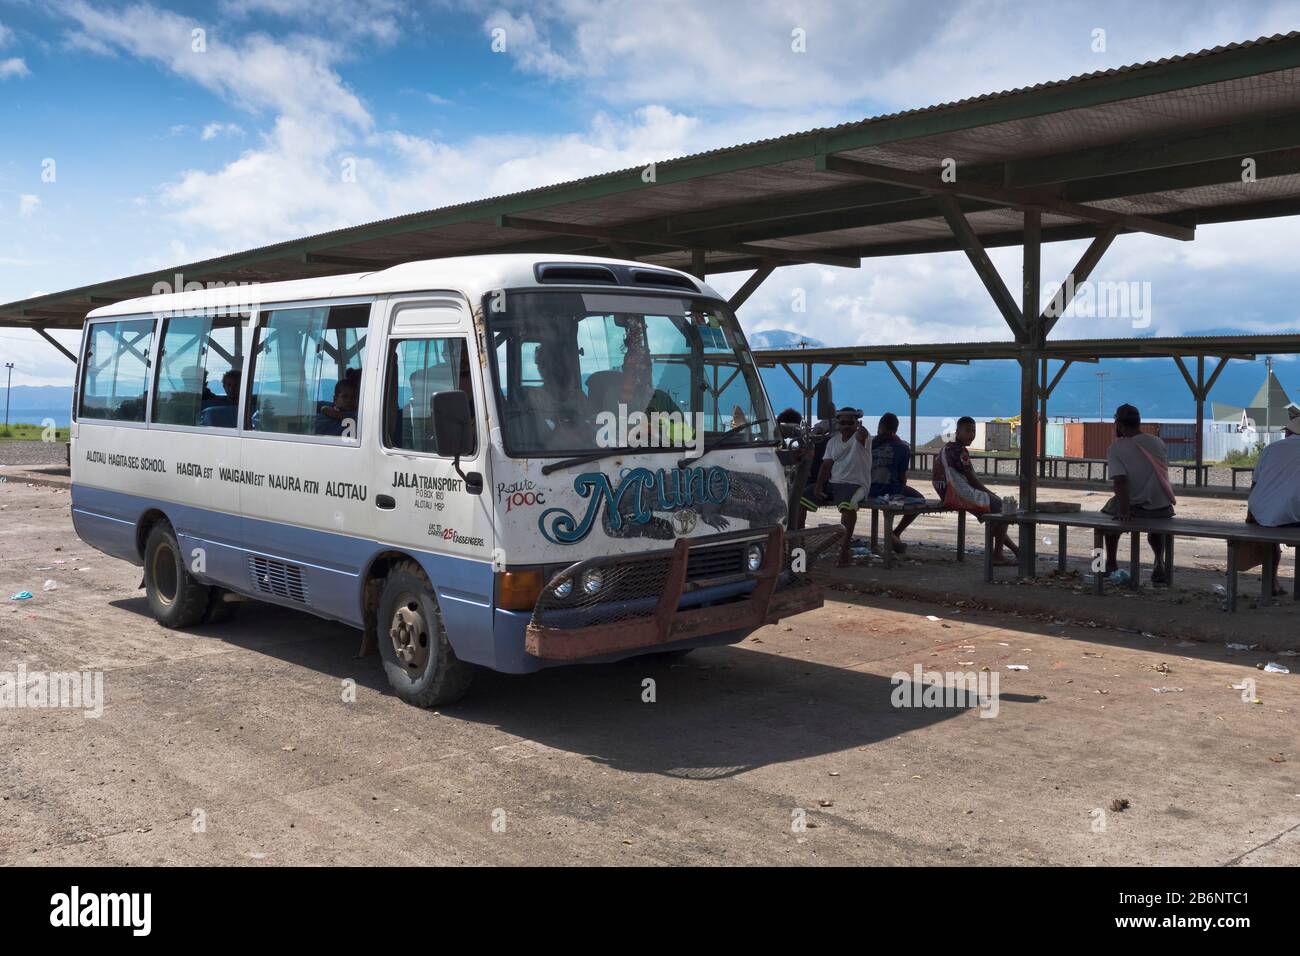 dh PNG Bus station ALOTAU PAPUA NEW GUINEA Local transport people waiting for public buses Stock Photo